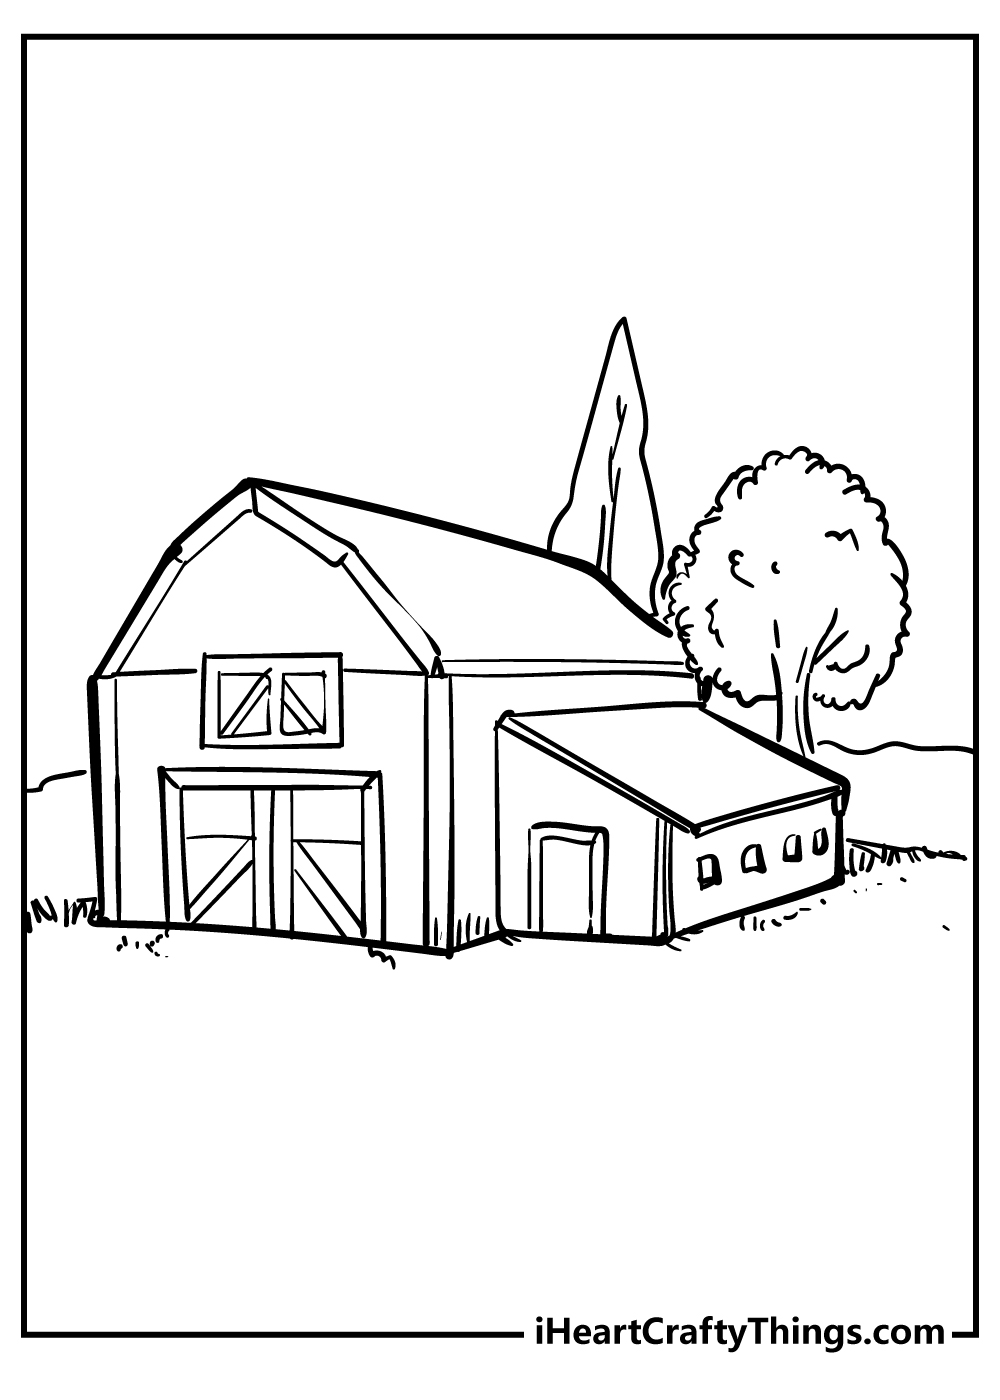 Barn Coloring Book for adults free download